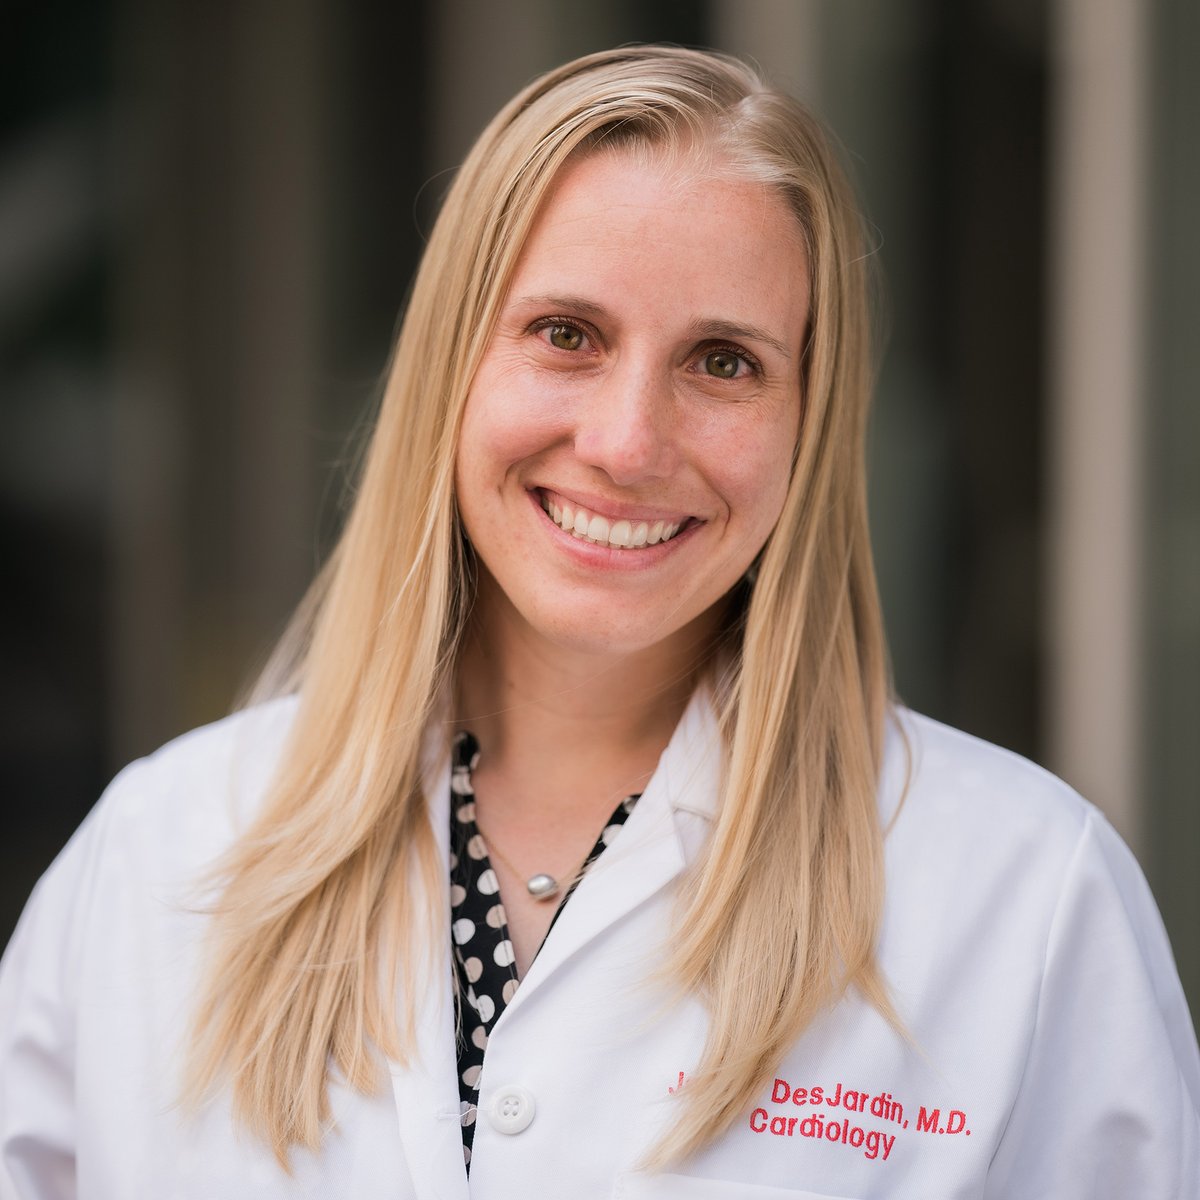 Dr. @JTDesJardin was selected as a finalist for the Philip K. Caves Award at @ISHLT 2023 for her abstract with Dr. Teresa De Marco. She was selected as one of six finalists for the award and will give an oral presentation at the conference in April. #UCSFCardiology #WIC